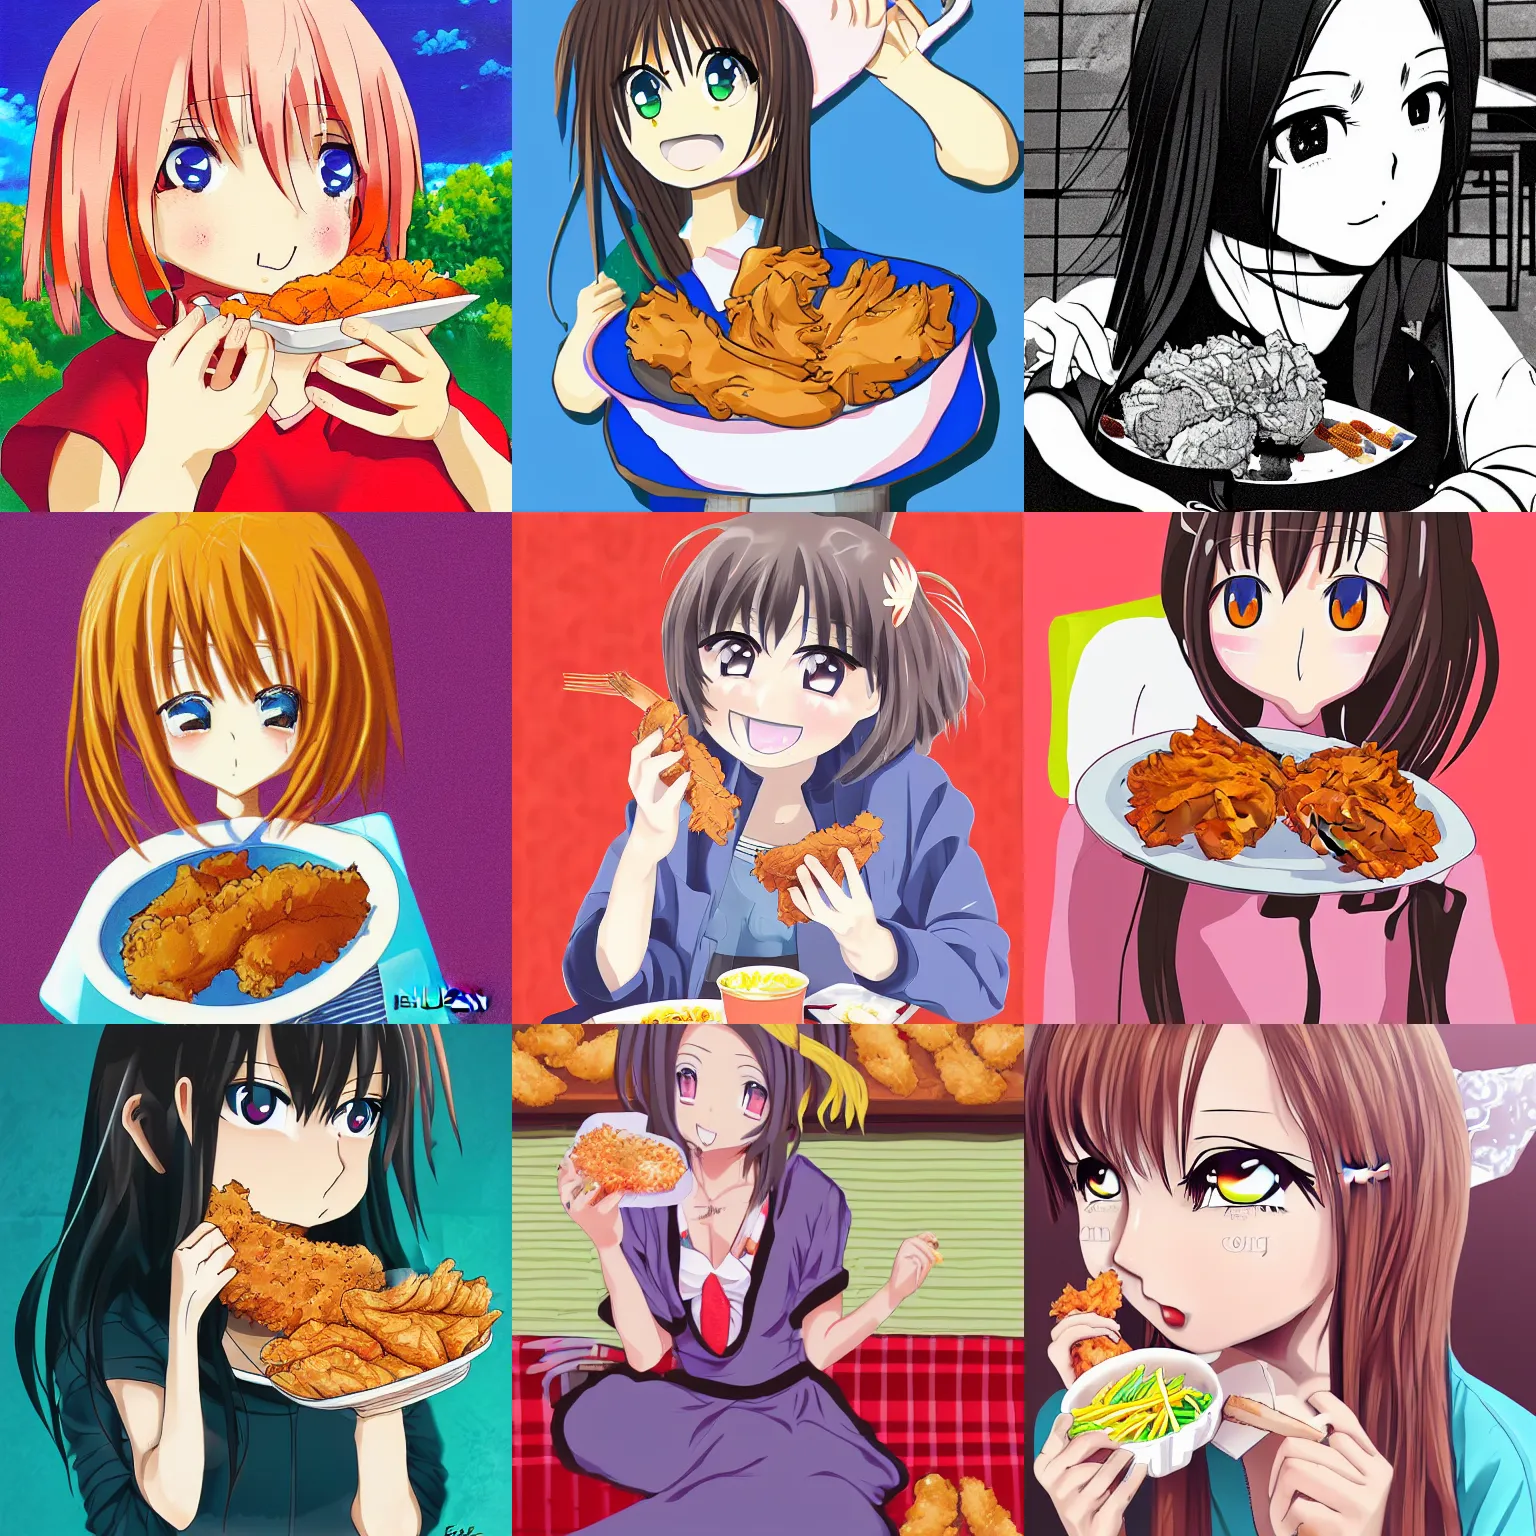 Prompt: anime girl eating fried chicken by elle goulding